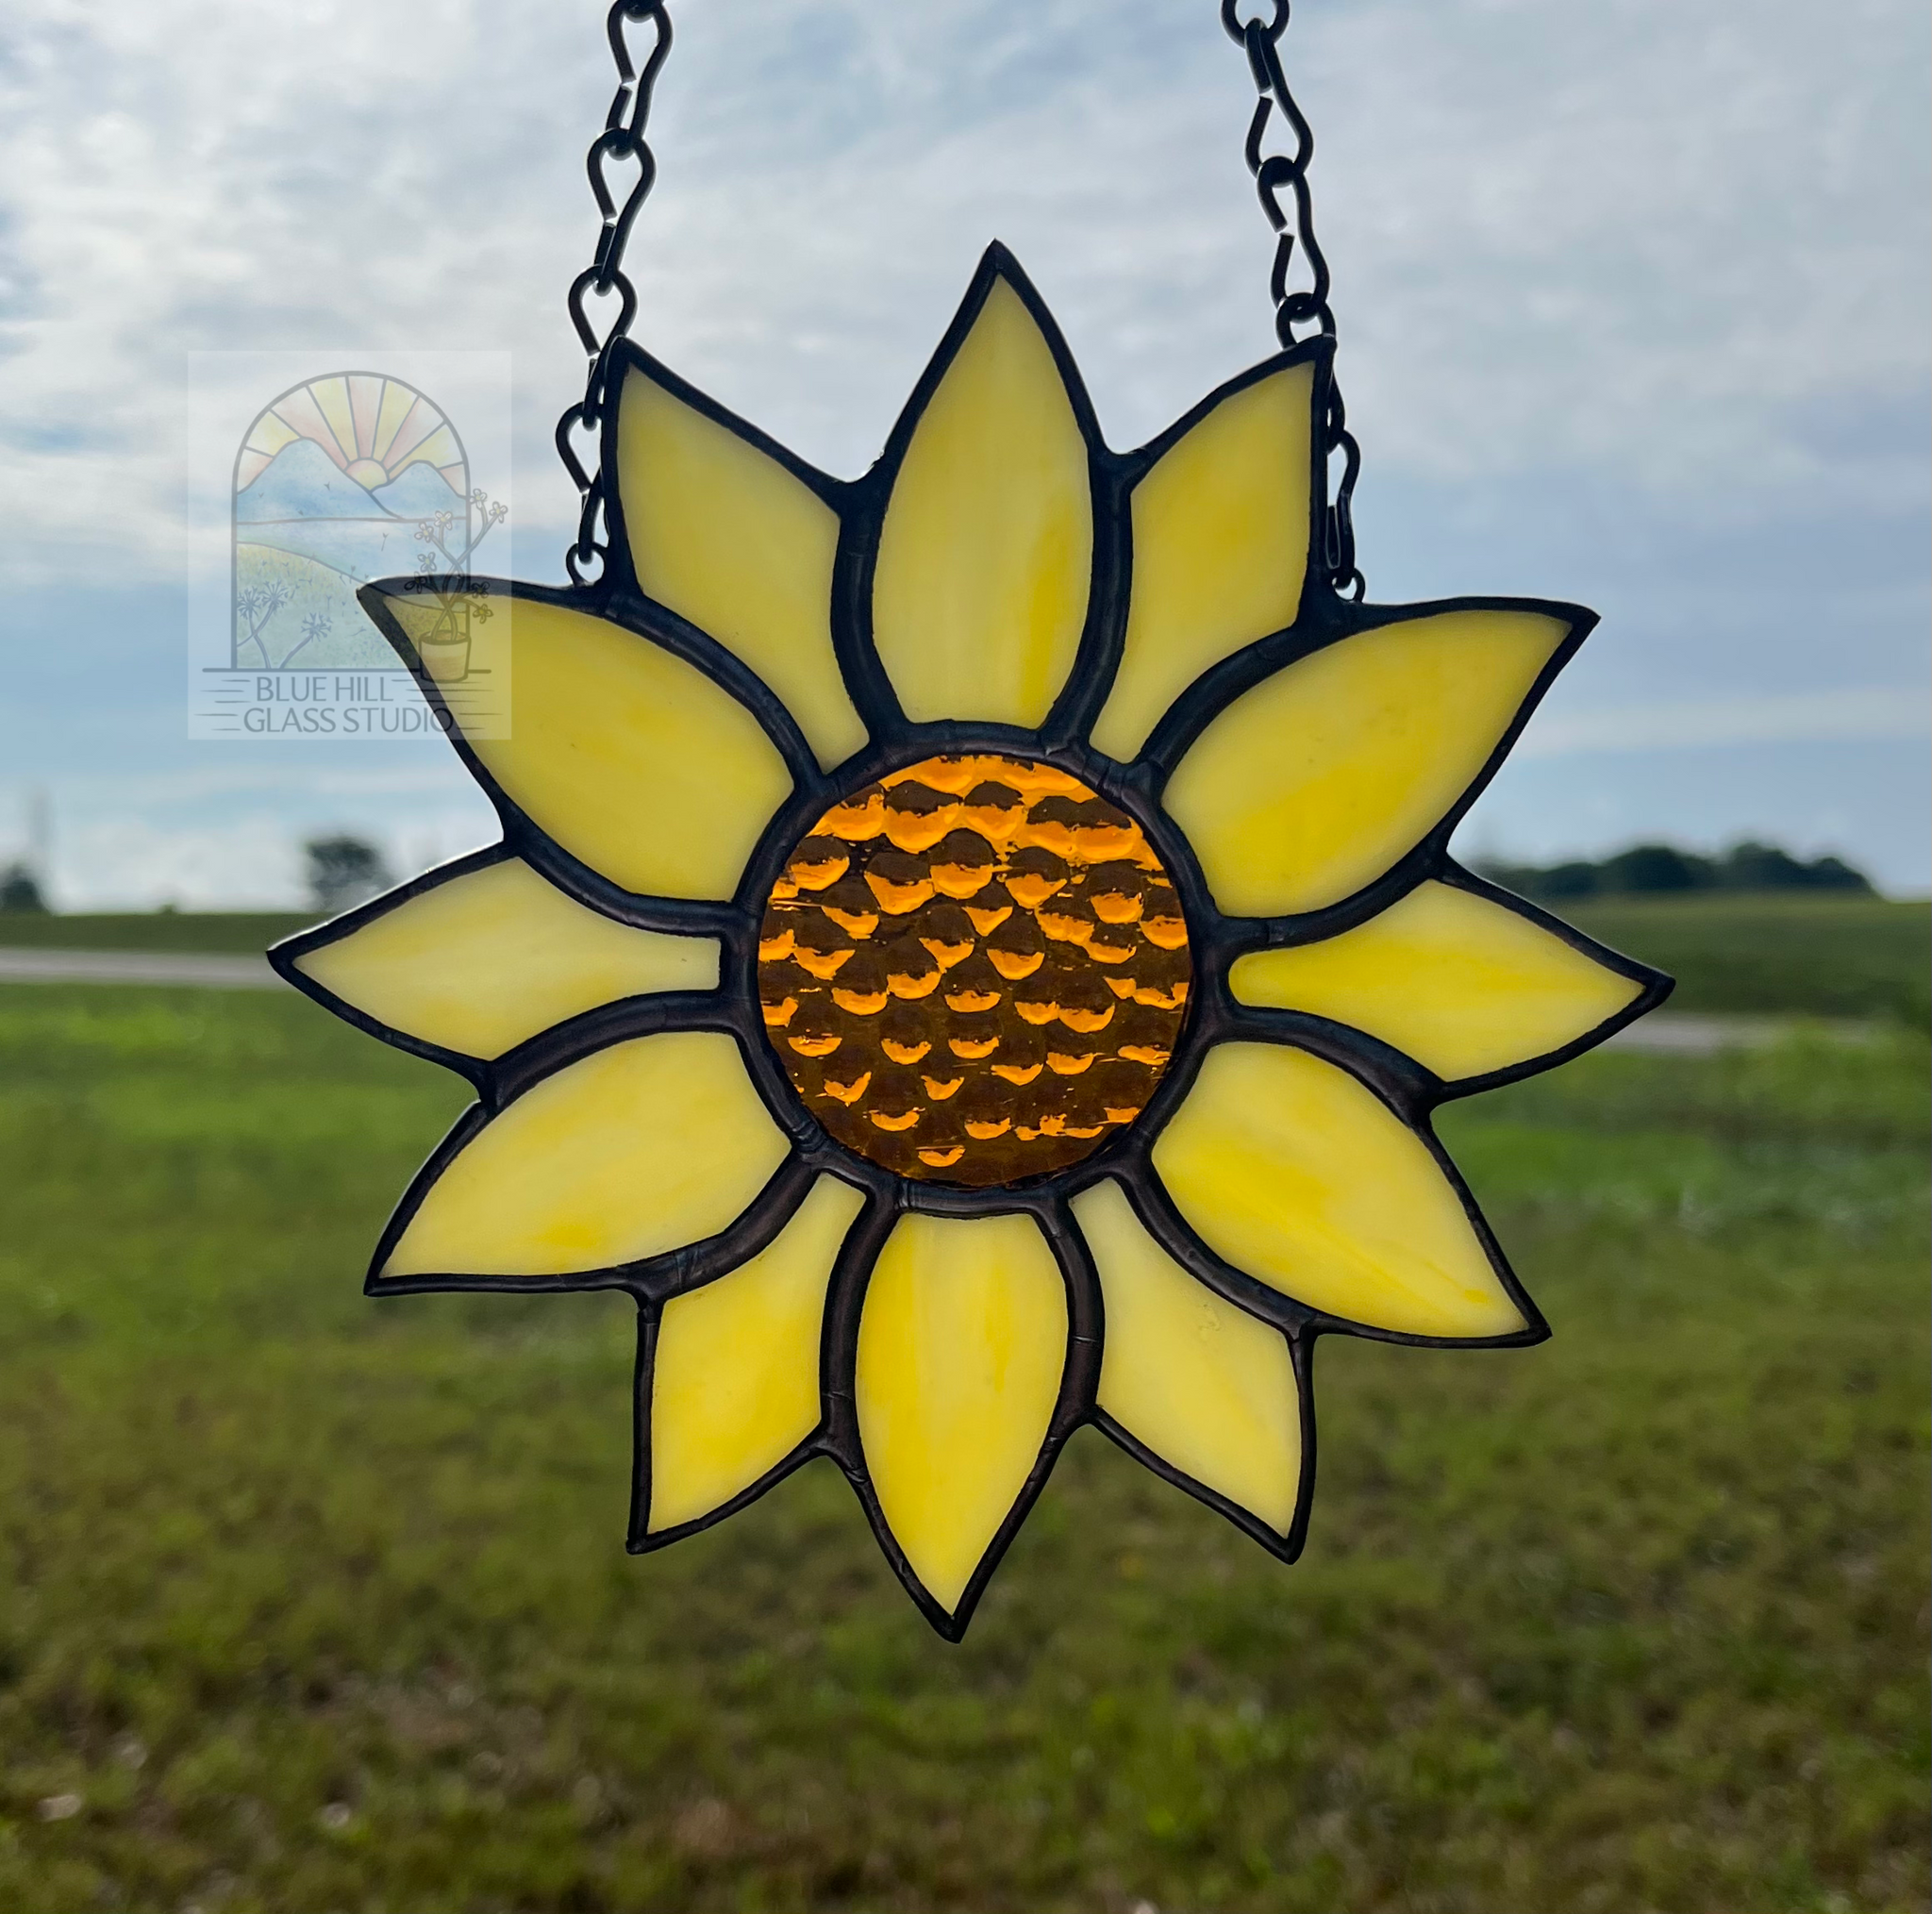 Sunflower stained glass suncatcher in yellow and amber glass